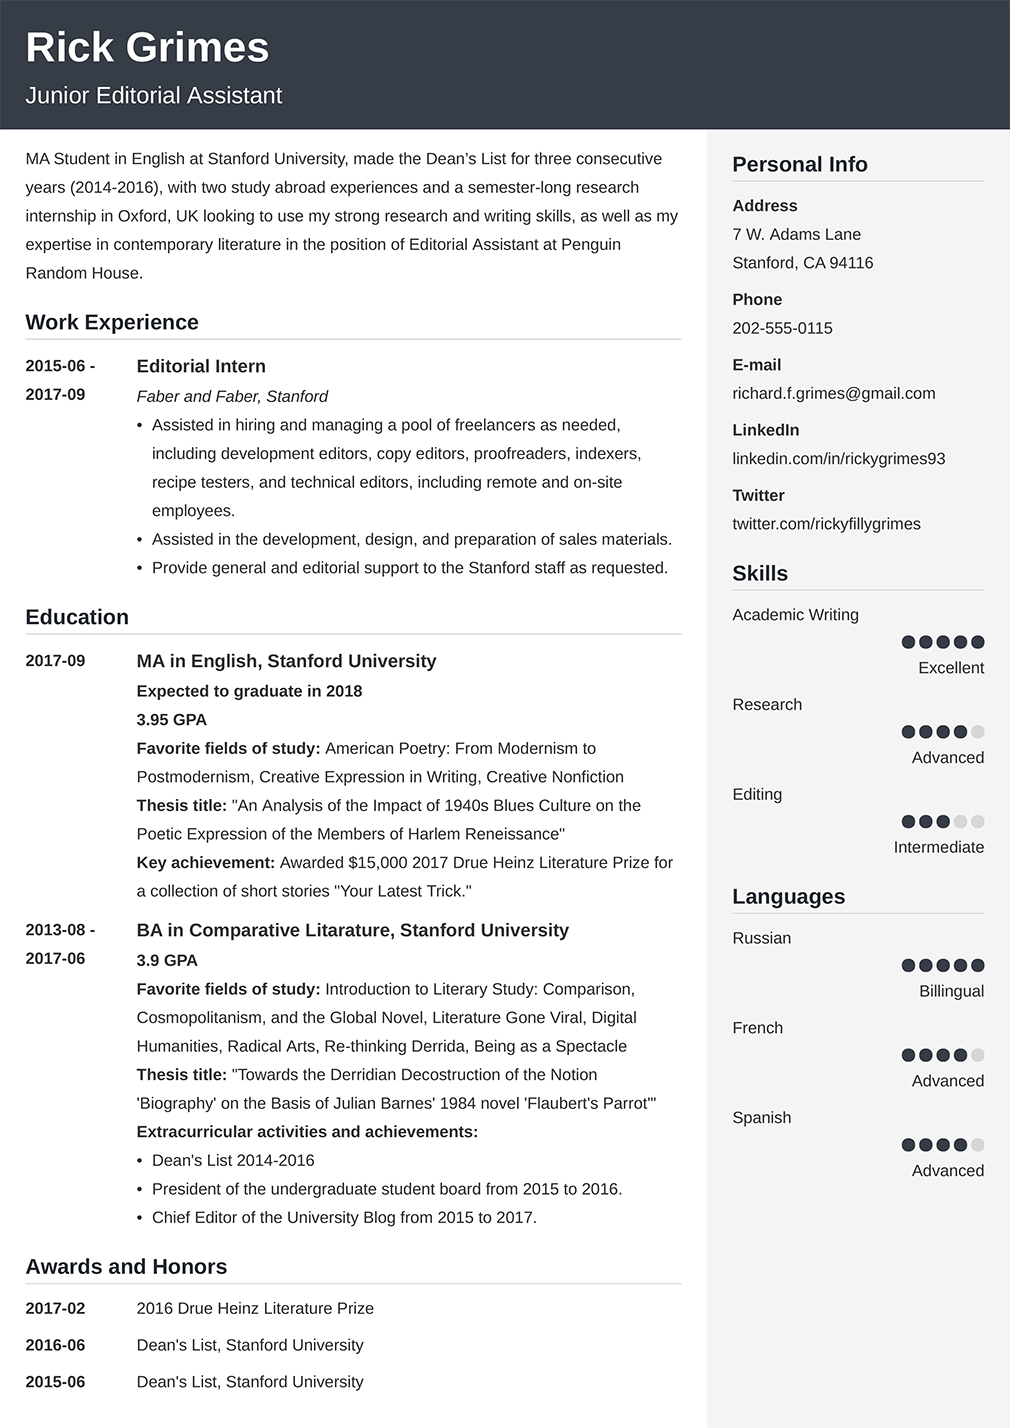 Work Experience Resume Template from cdn-images.zety.com